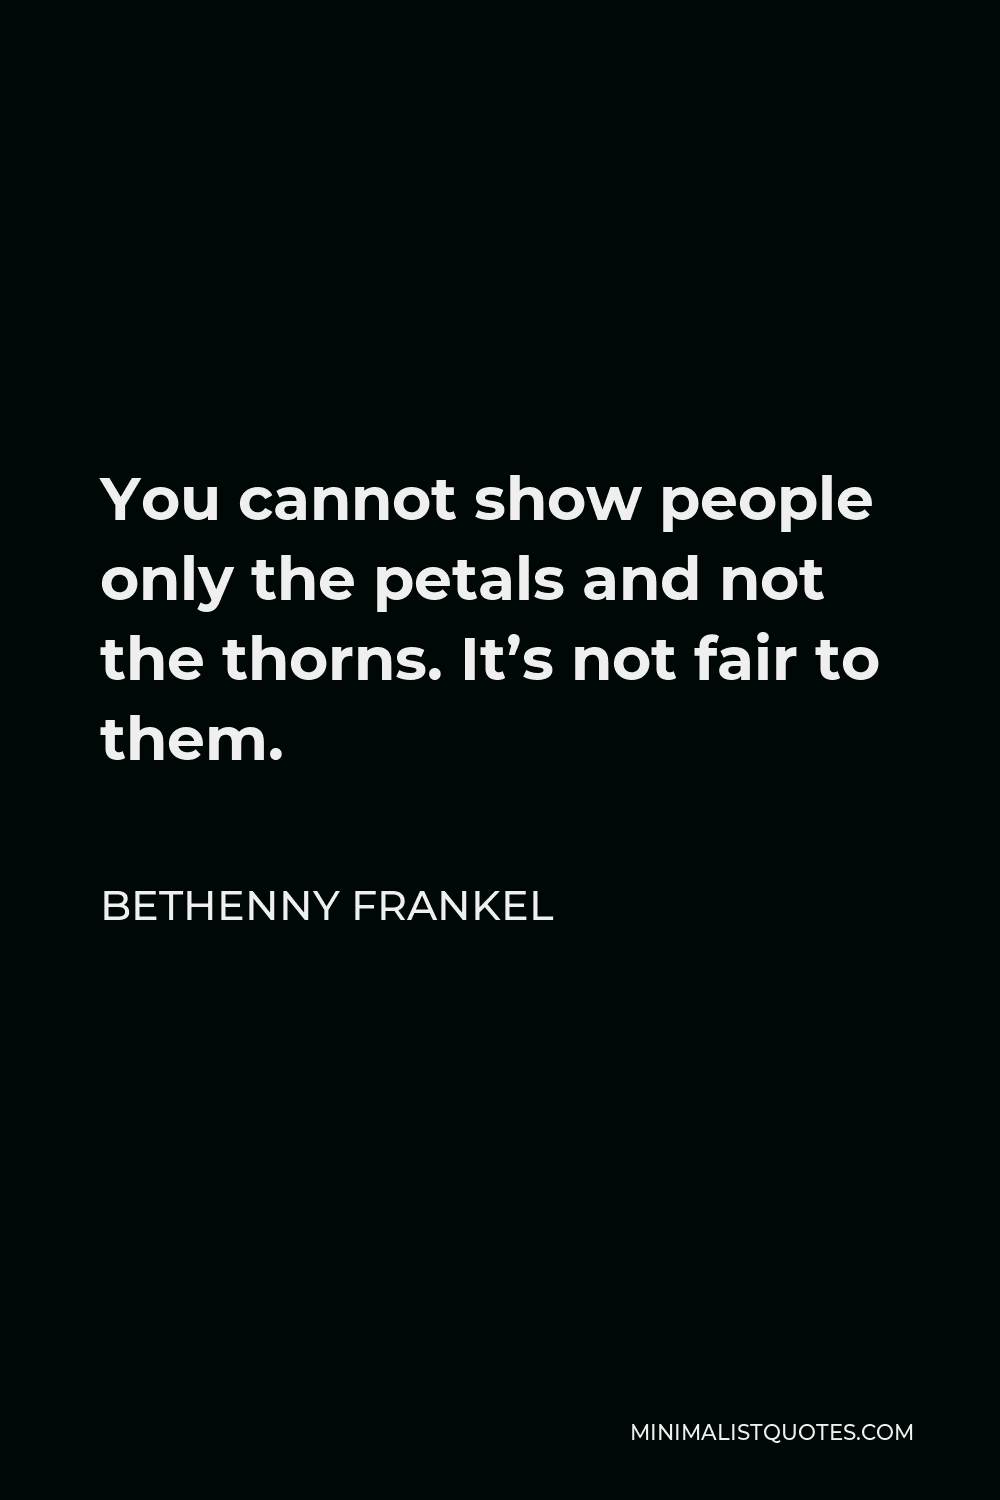 Bethenny Frankel Quote - You cannot show people only the petals and not the thorns. It’s not fair to them.